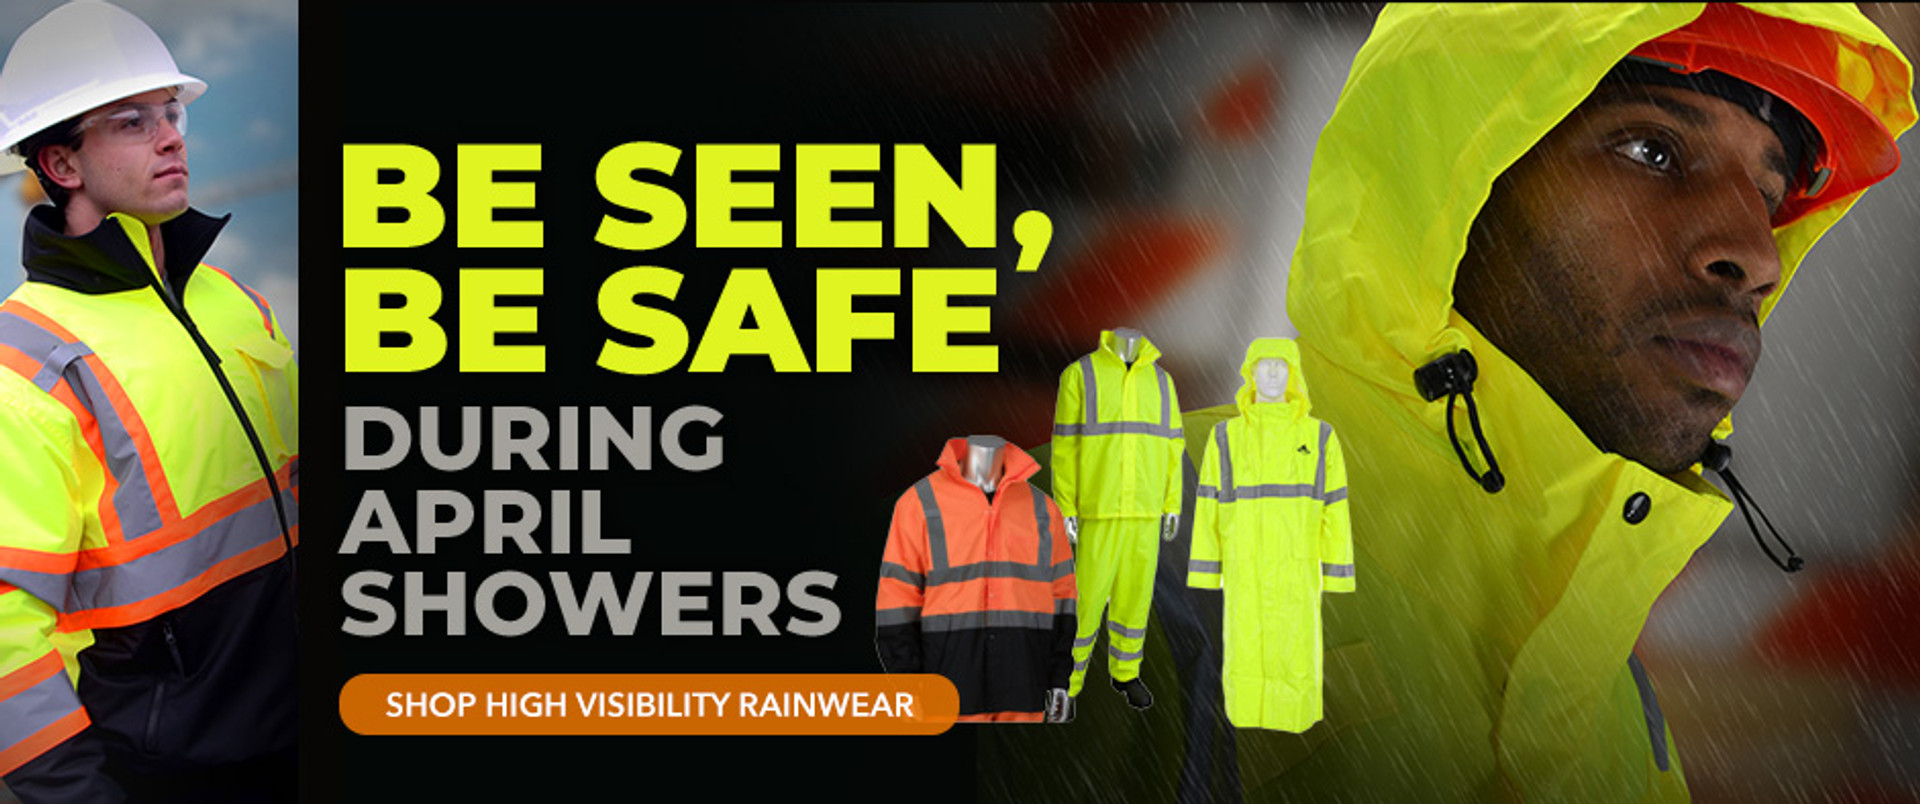 Be seen, be safe during April showers. Shop High Visibility Rainwear